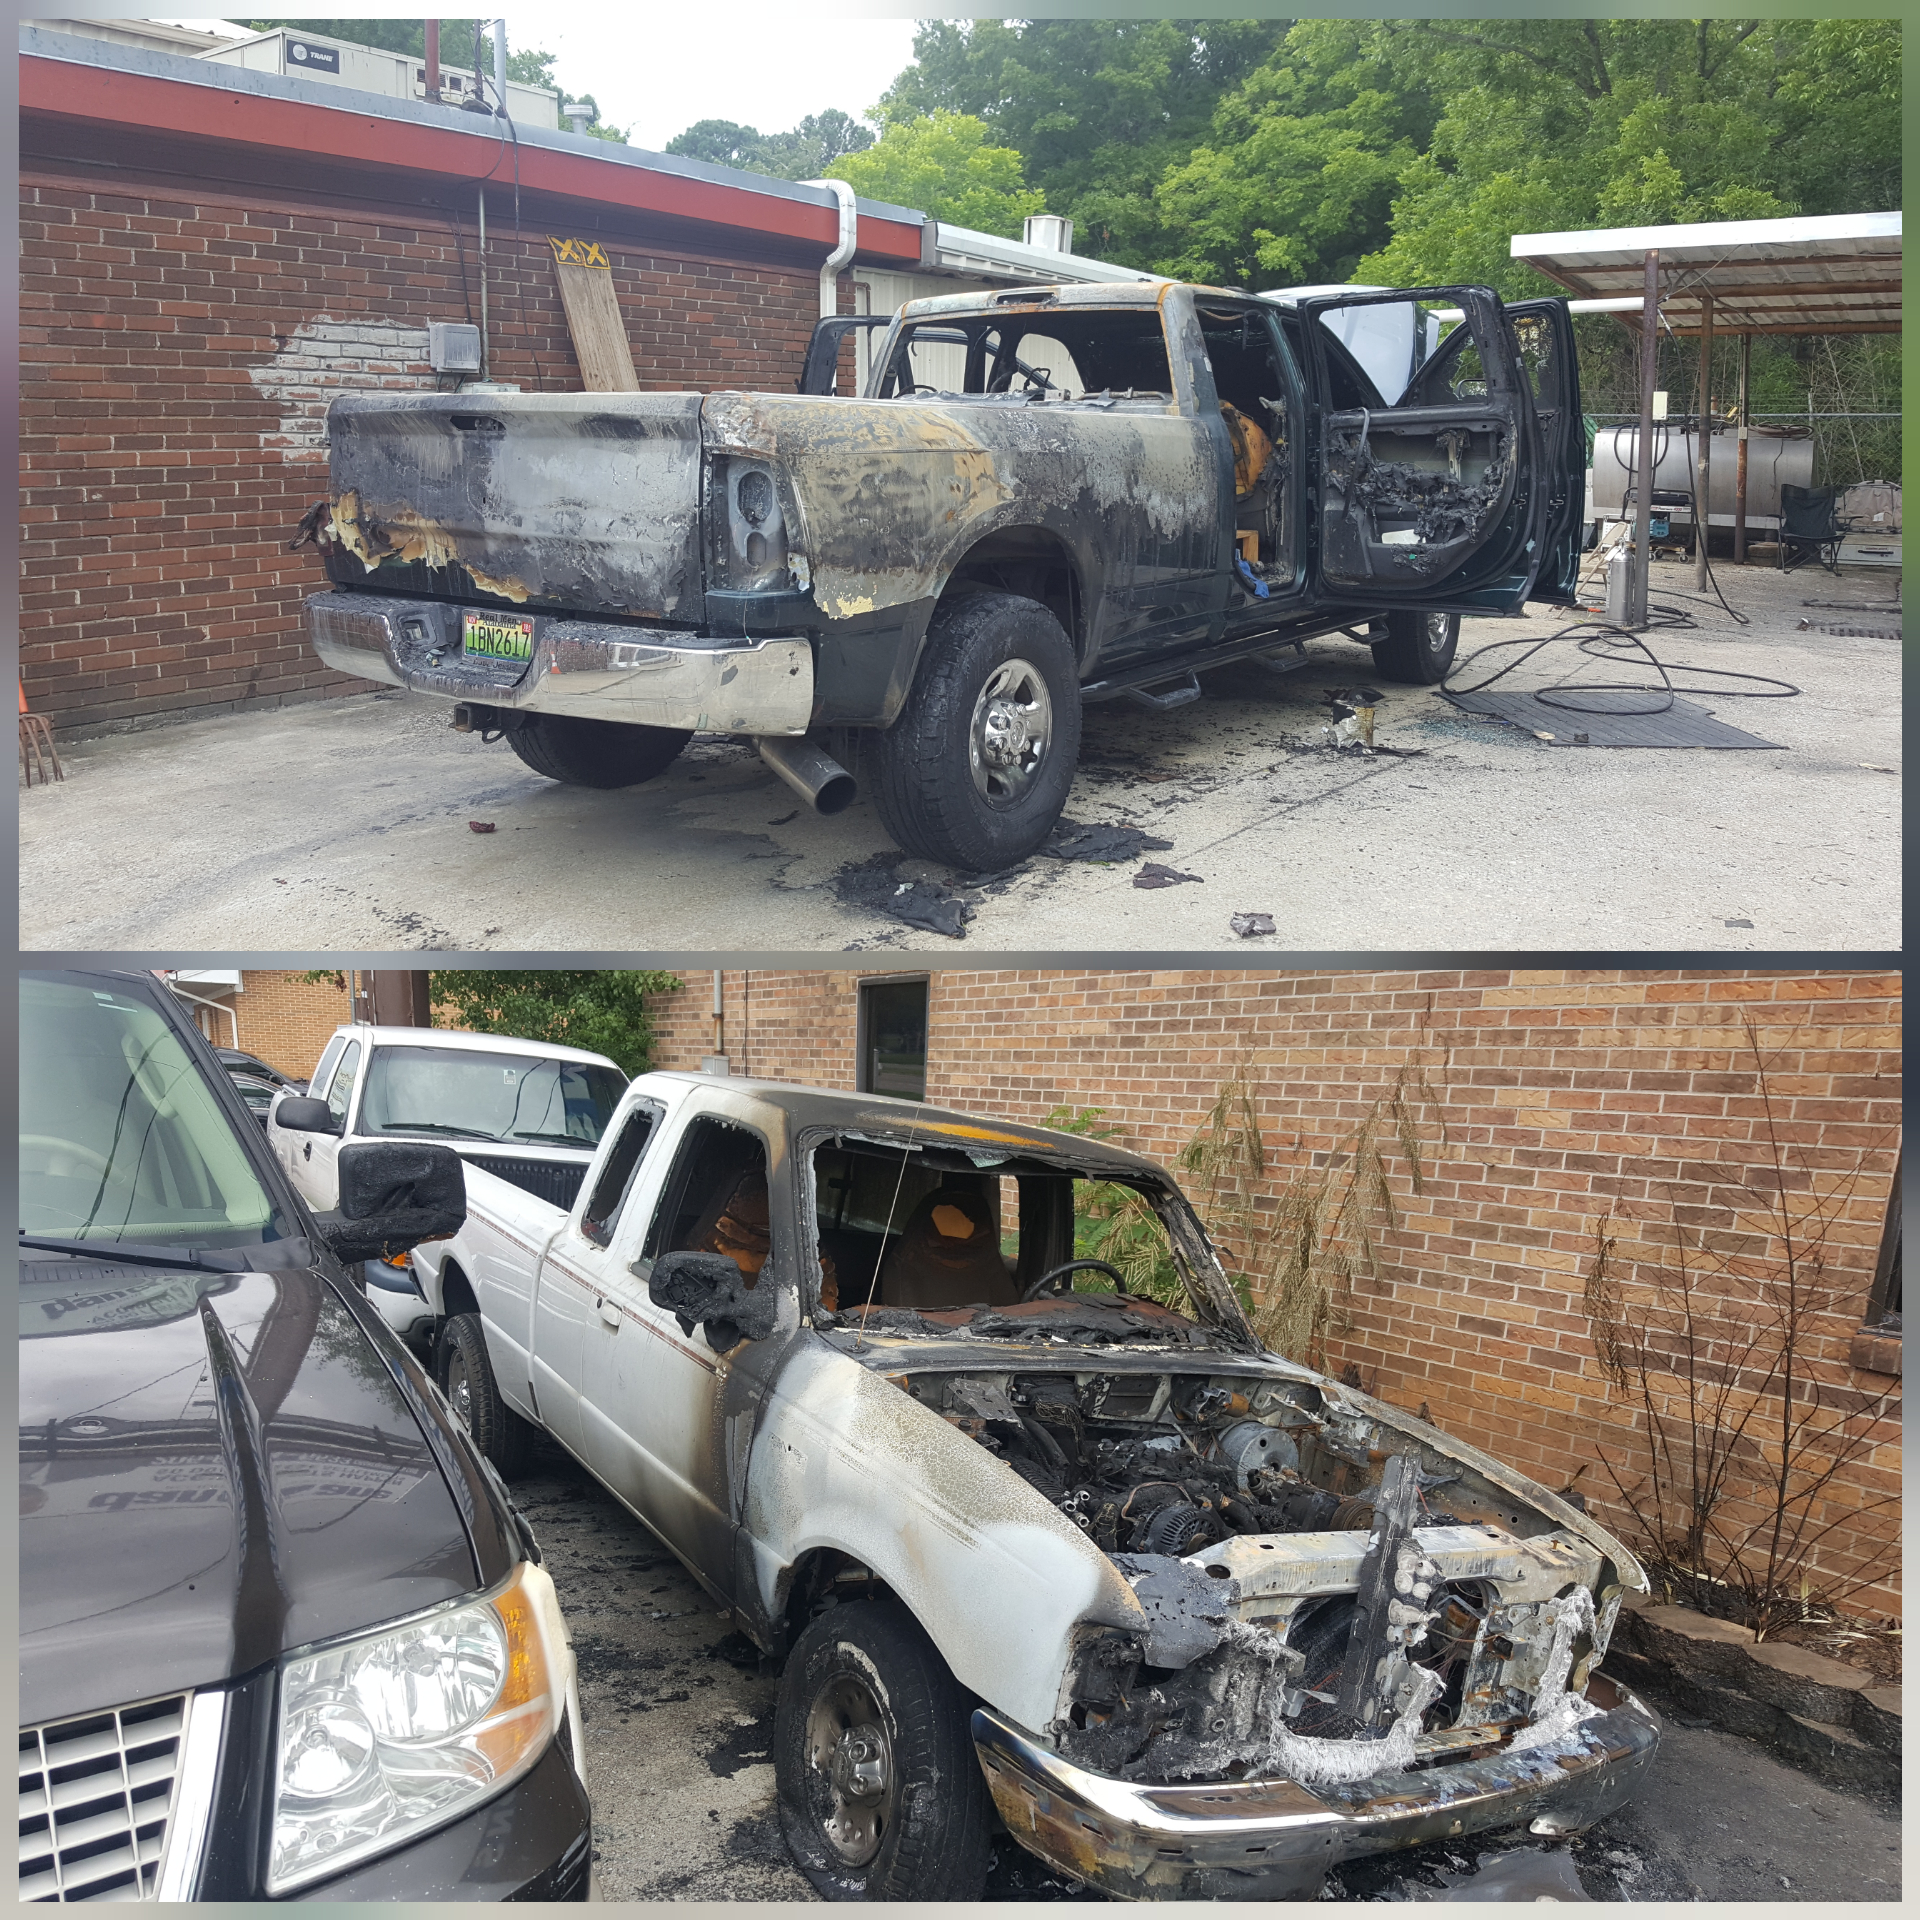 Car fires reported at two Center Point businesses in possible arson cases